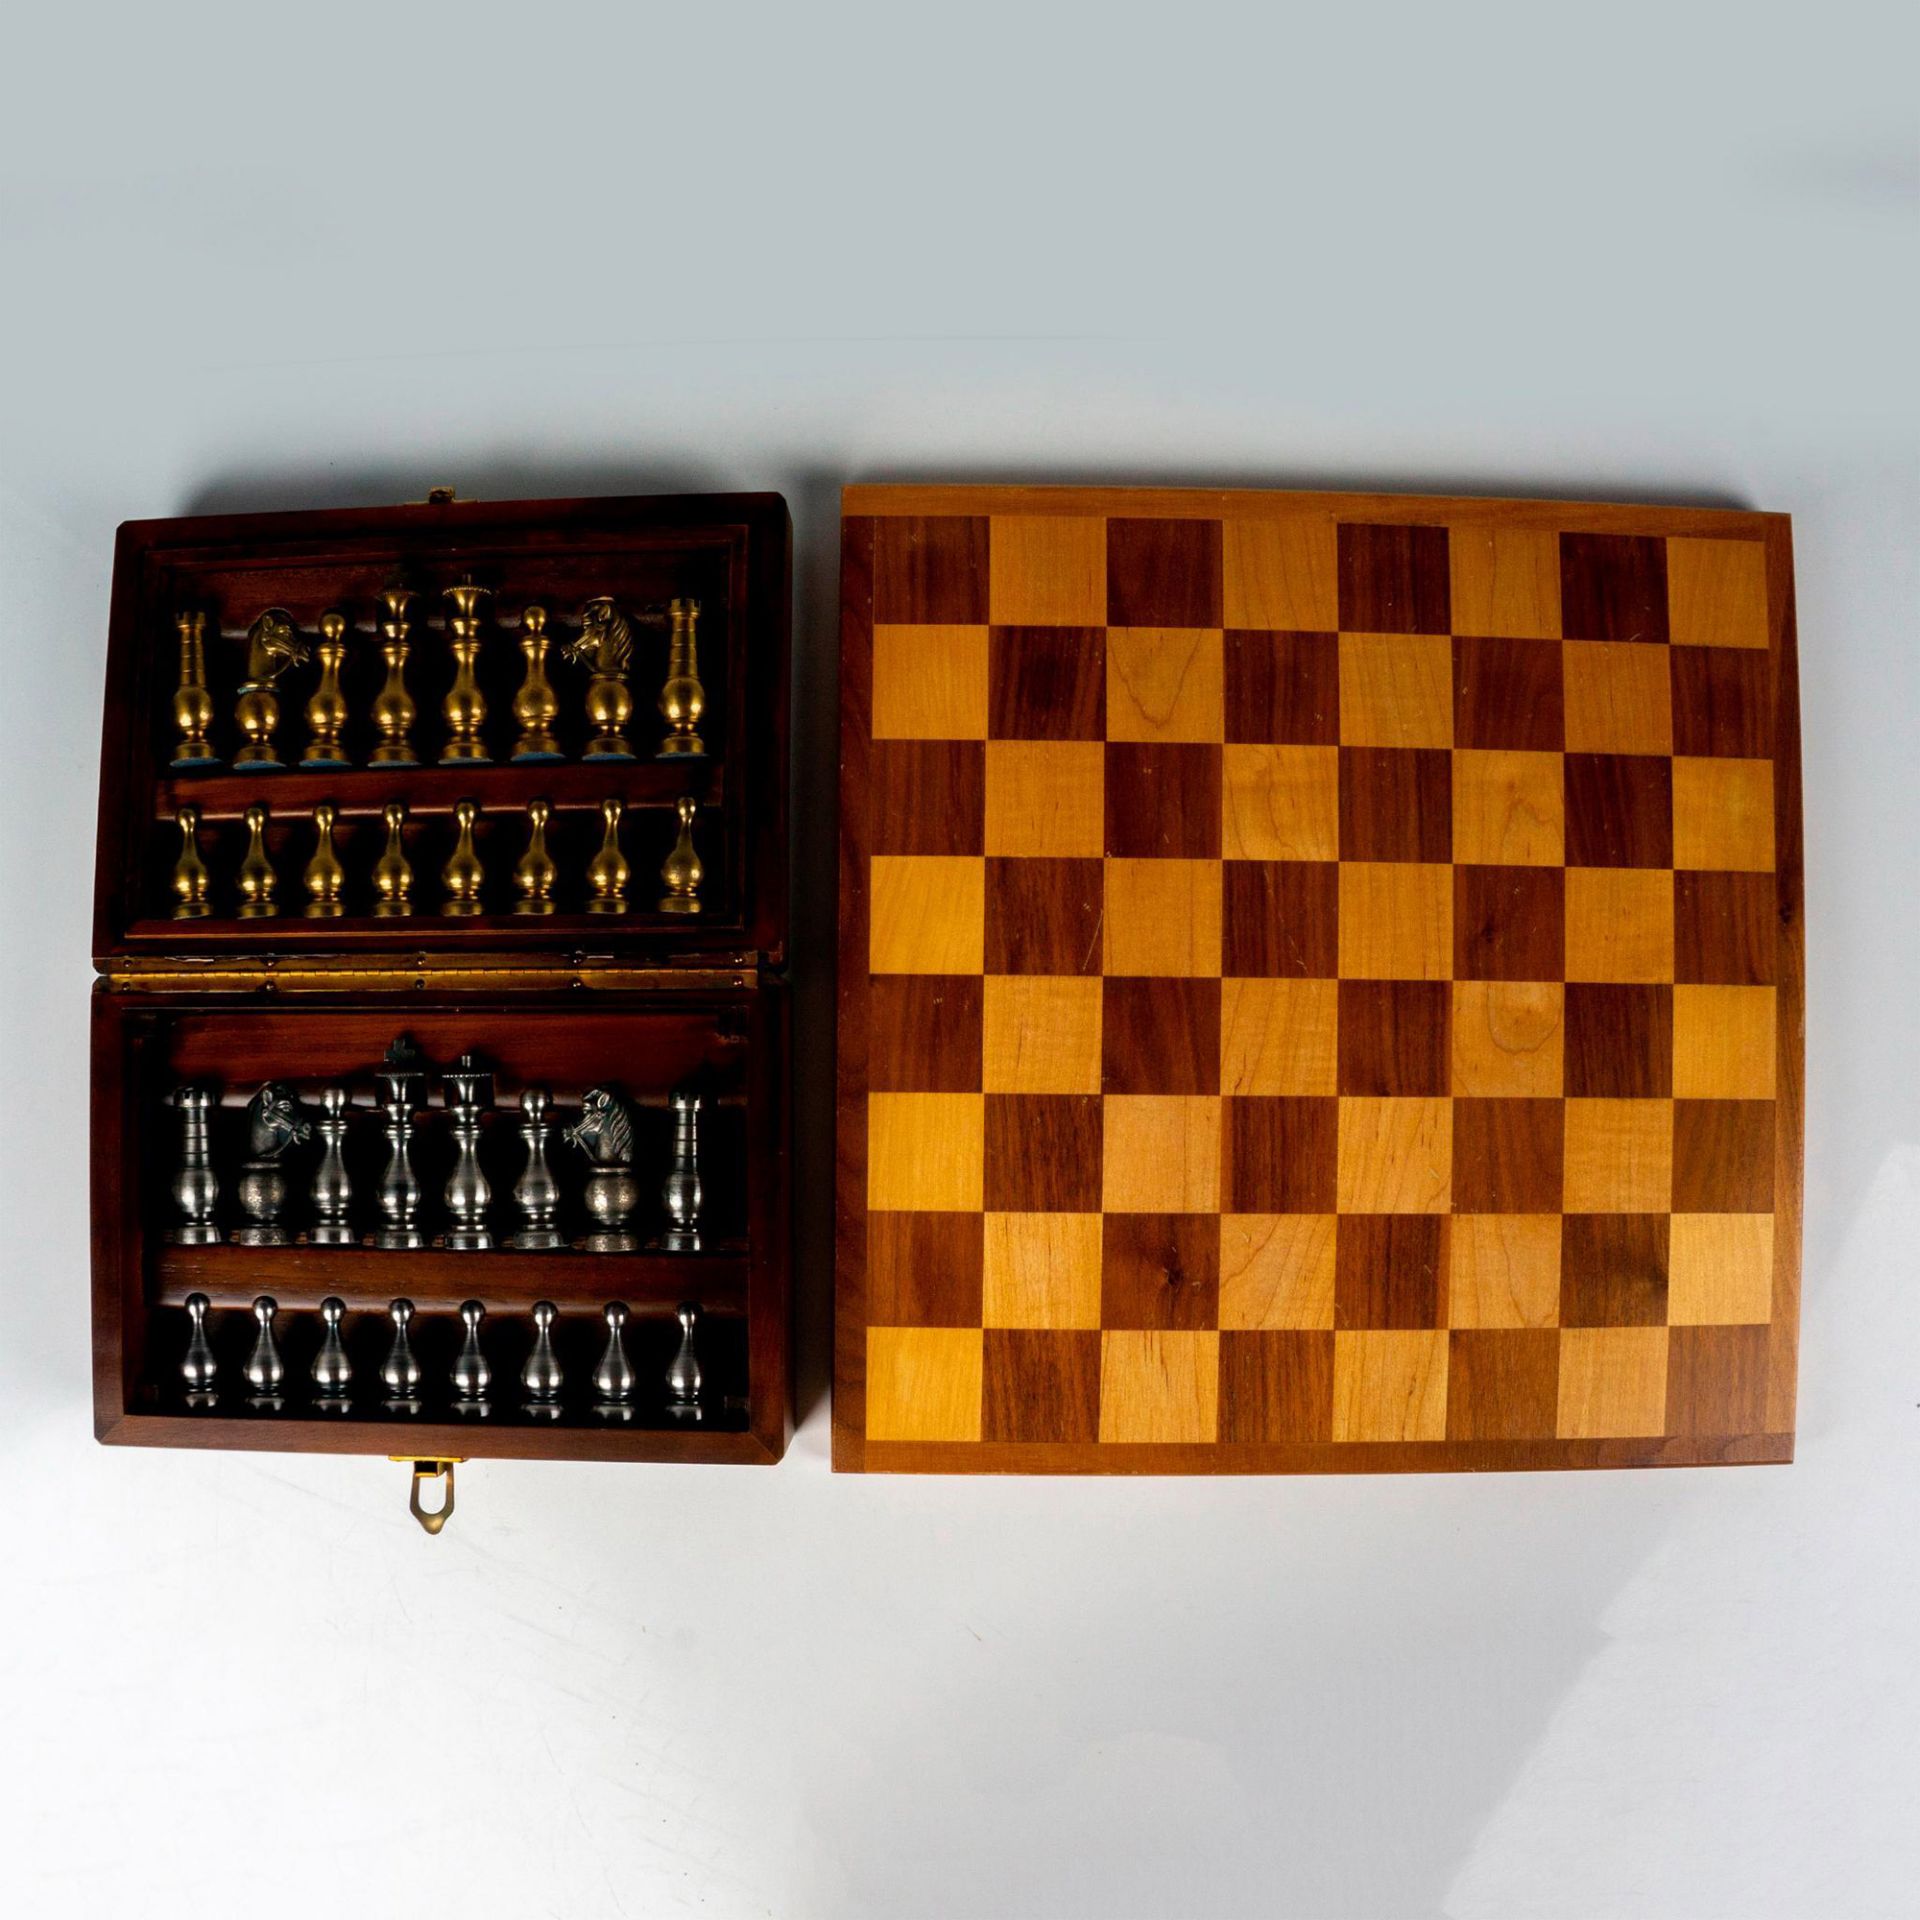 33pc Pewter Chess Set with Wooden Board - Image 2 of 3